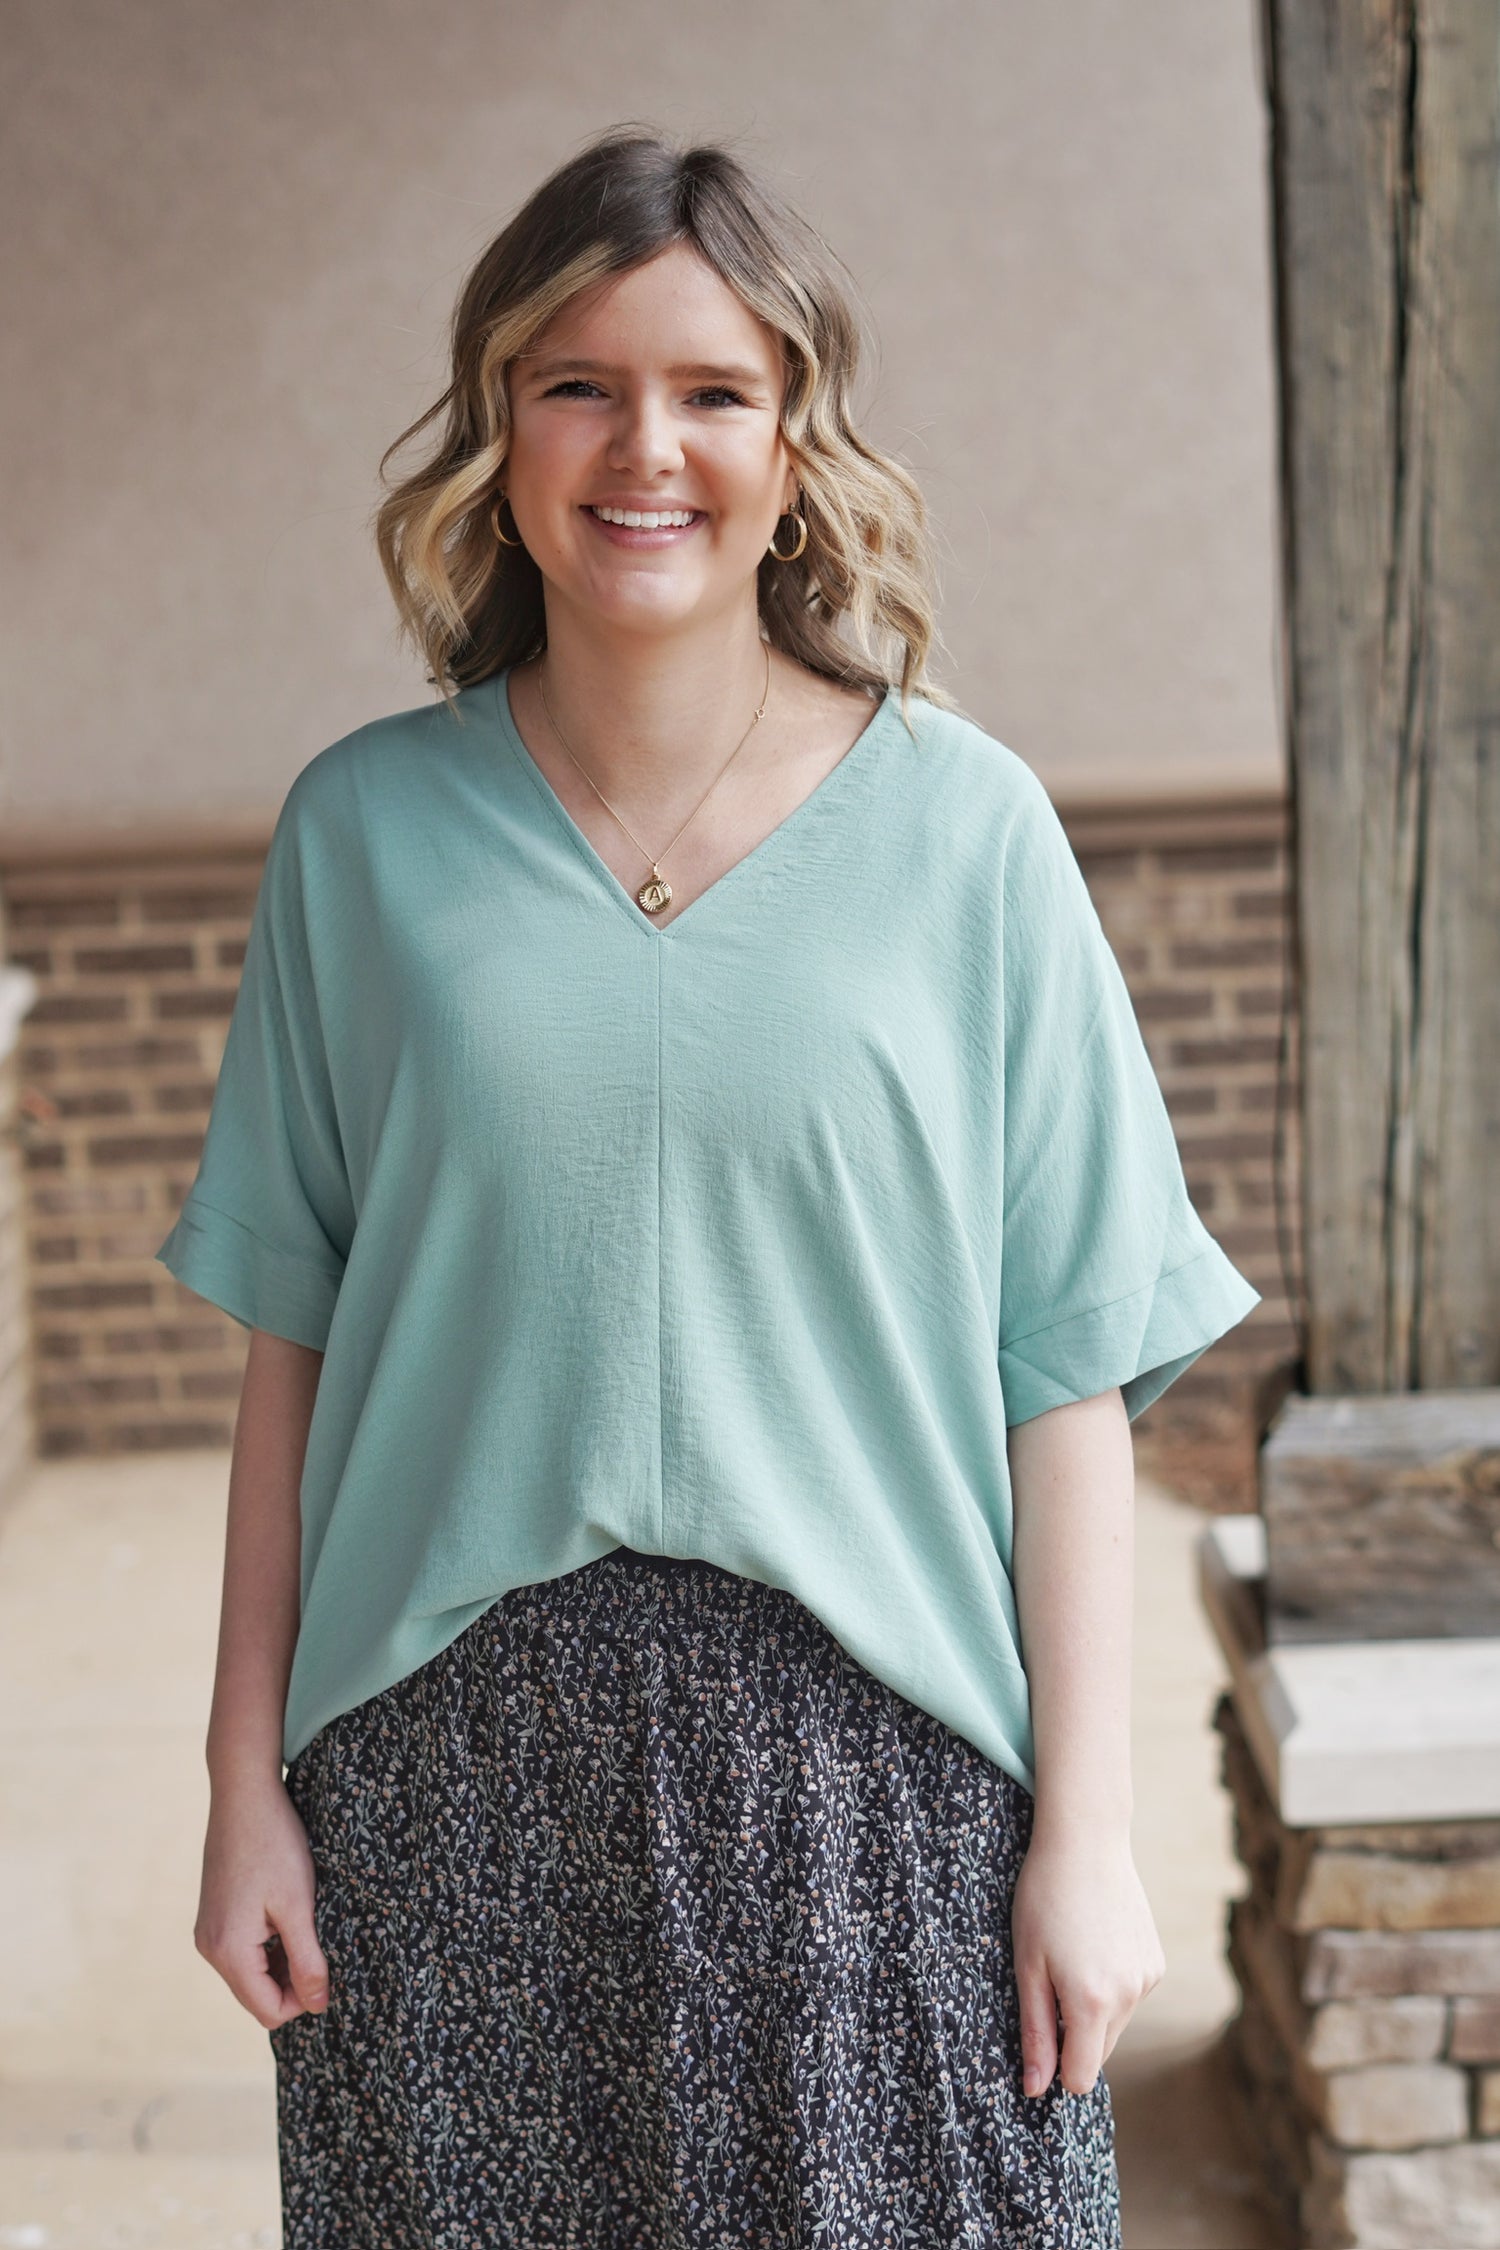 Brighter Days V-Neck Top V-Neckline Short Cuffed Sleeves Lightweight Material Colors: Mint,  Relaxed Fit Full Length 100% Polyester